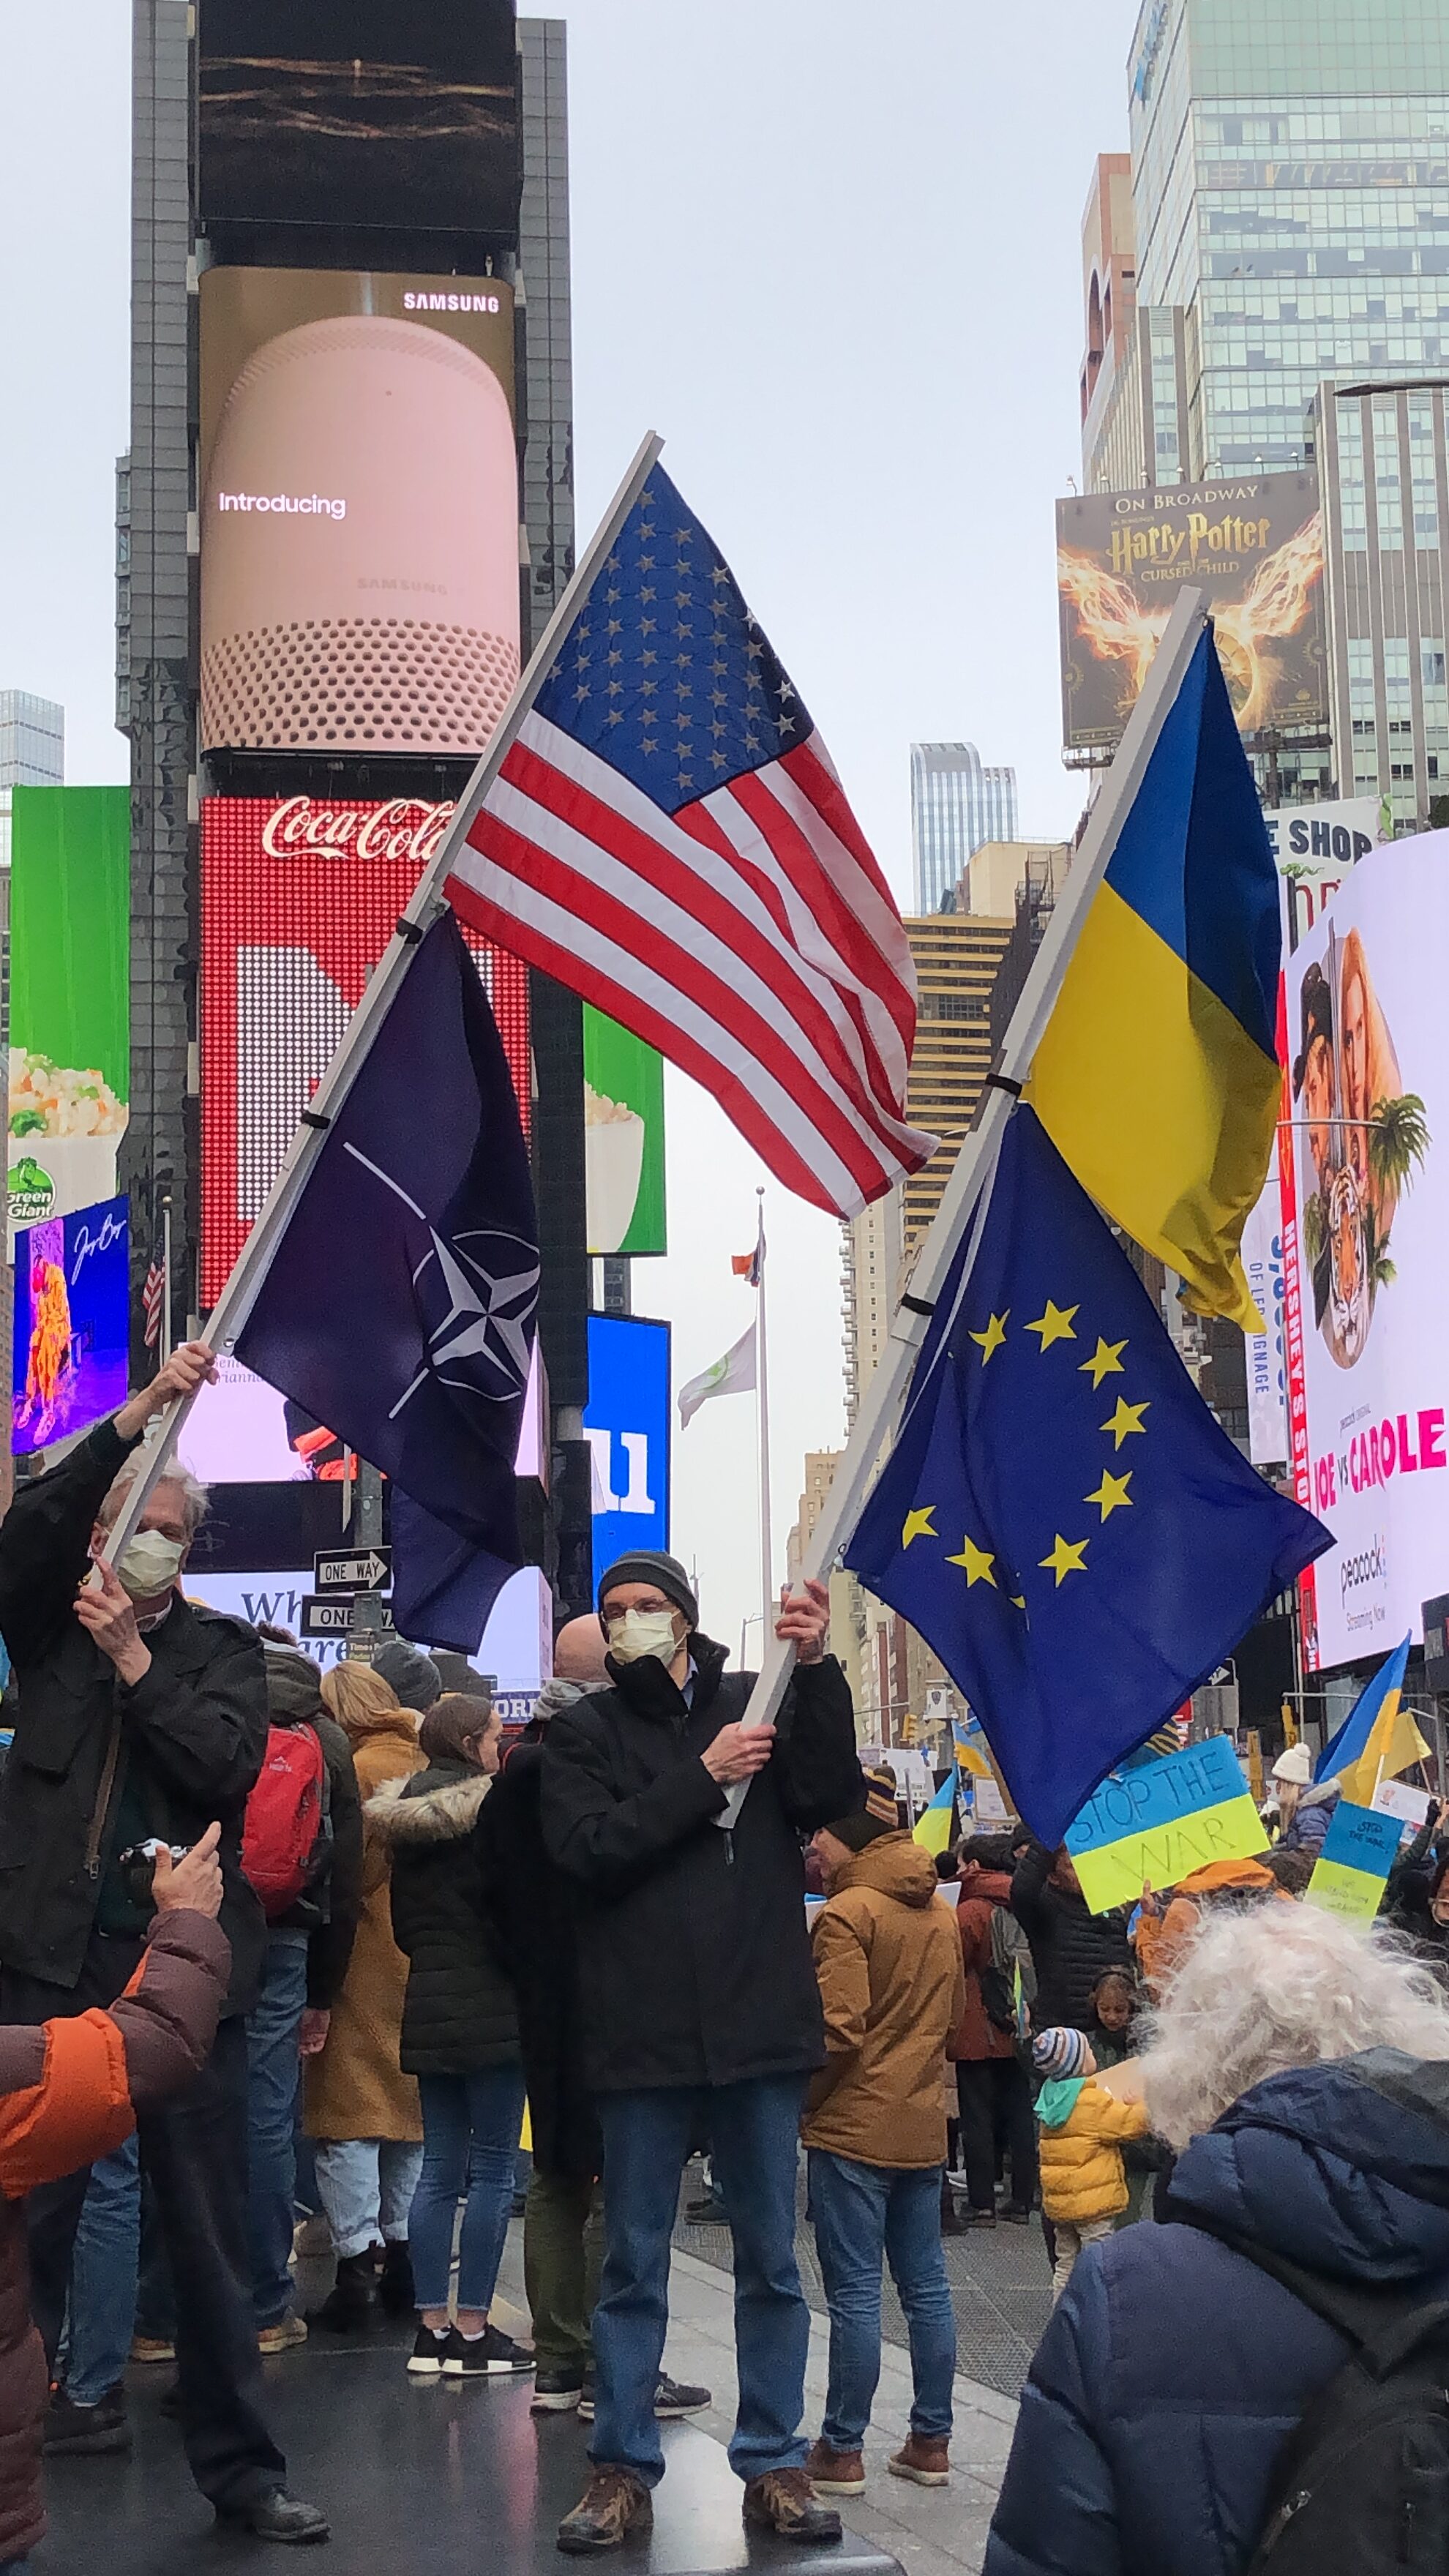 Rally in solidarity with Ukraine, Time Square, New York, March 5th, 2022